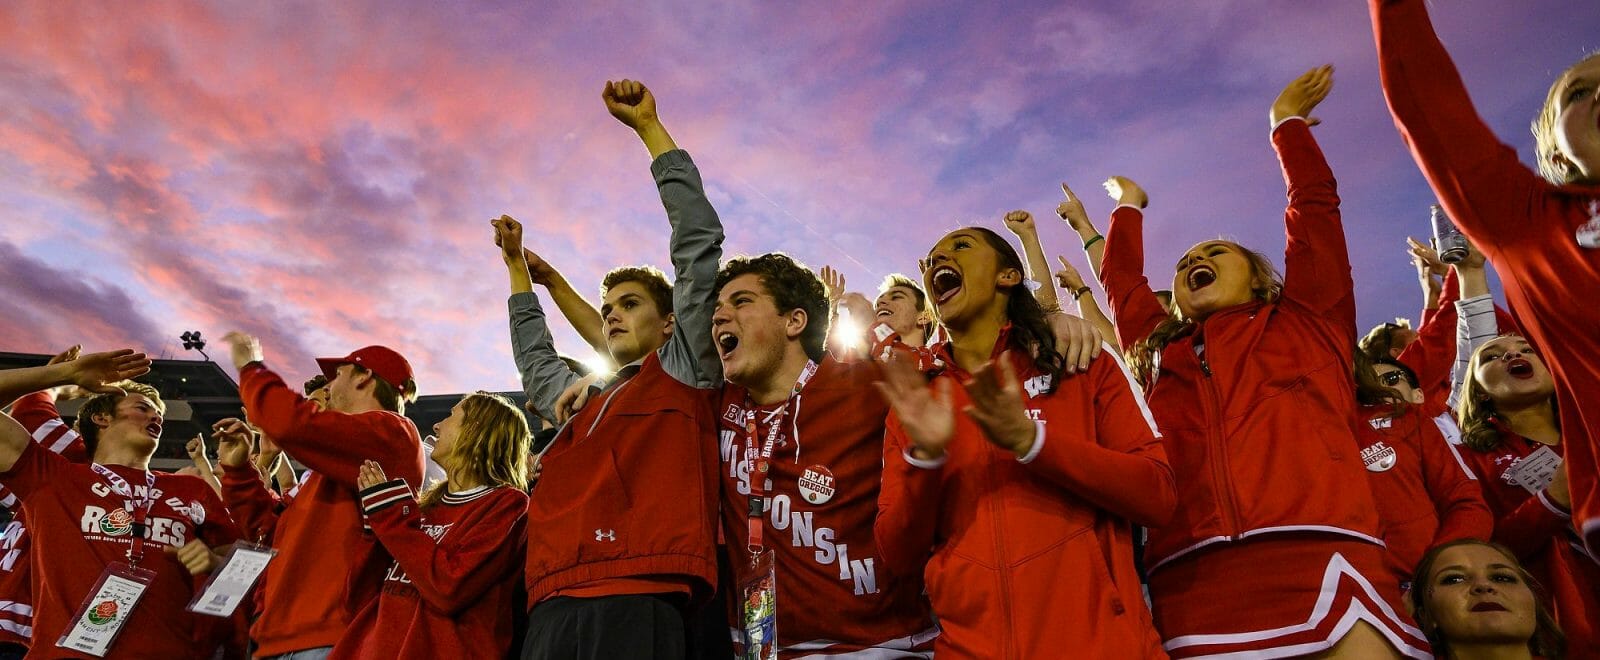 As the sun sets over the stadium, badger fans cheer on the team during the Rose Bowl Game in Pasadena, California on Jan. 1, 2020.